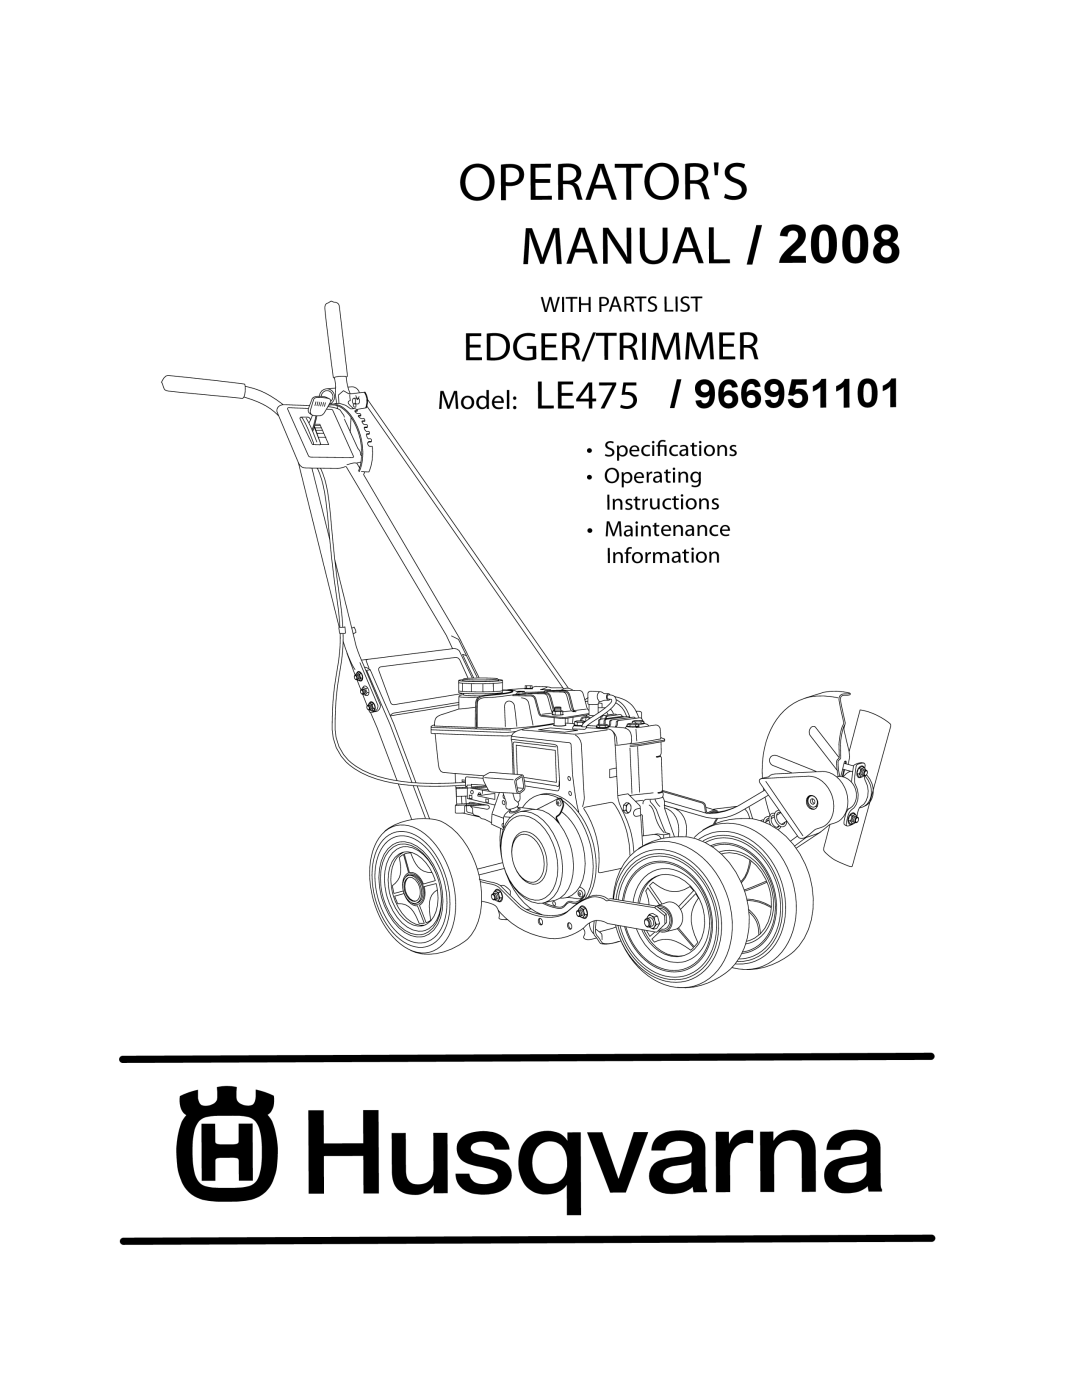 Husqvarna LE475 manual With Parts List, Specications, Maintenance Information, Operating Instructions, Operators Manual 